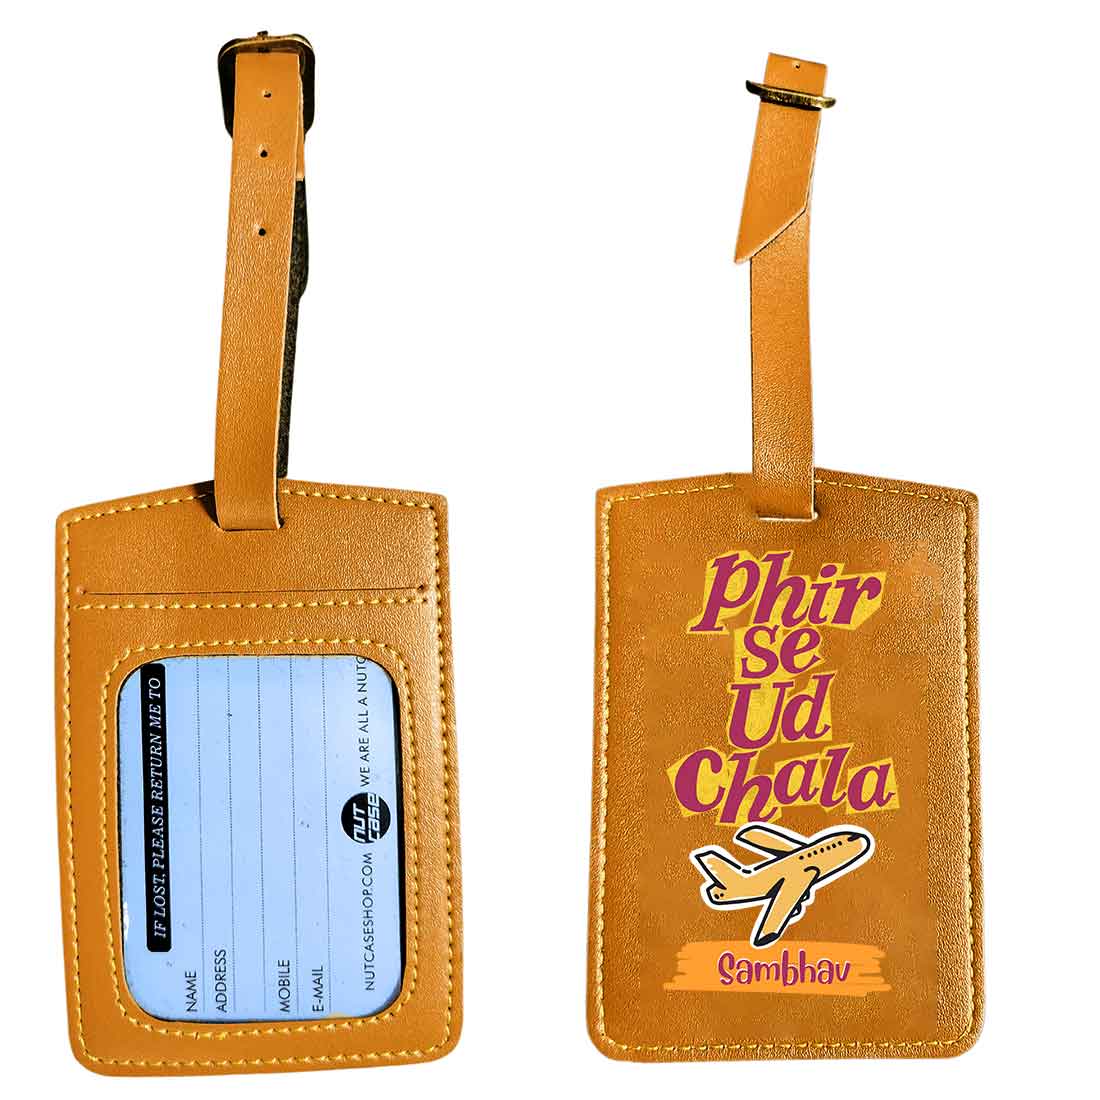 Cool Passport Covers Faux Leather Custom Holders for Passports-Phir Se Ud Chala